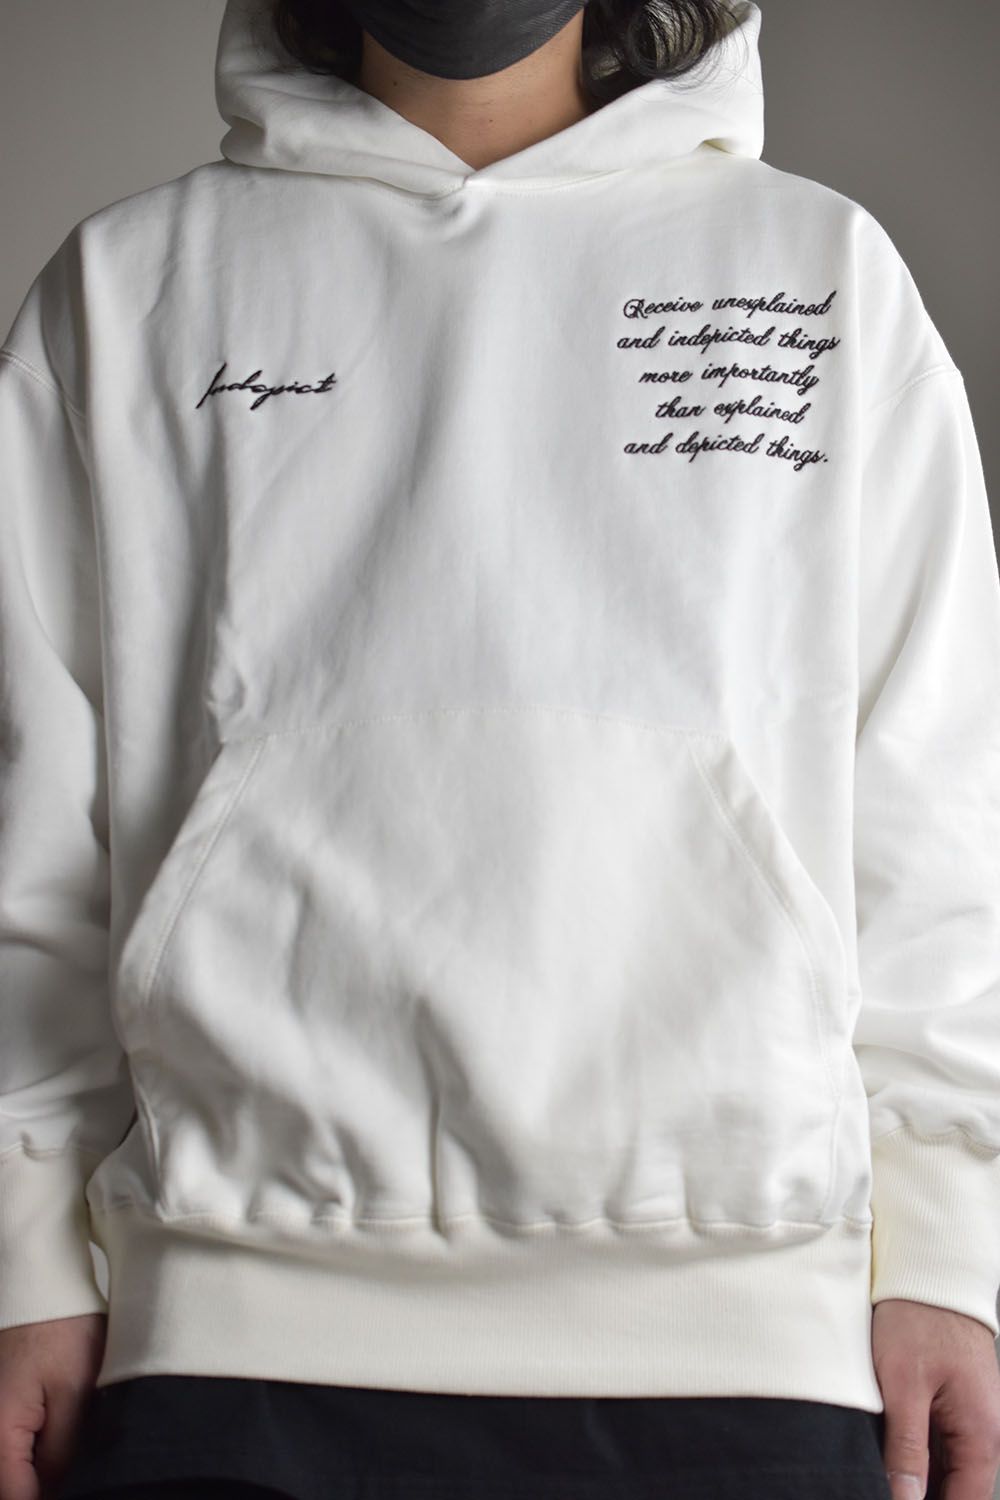 INDEPICT Embroidery PO Hooded"White"/インディピクト刺繍プルオーバーフーデッド"ホワイト"